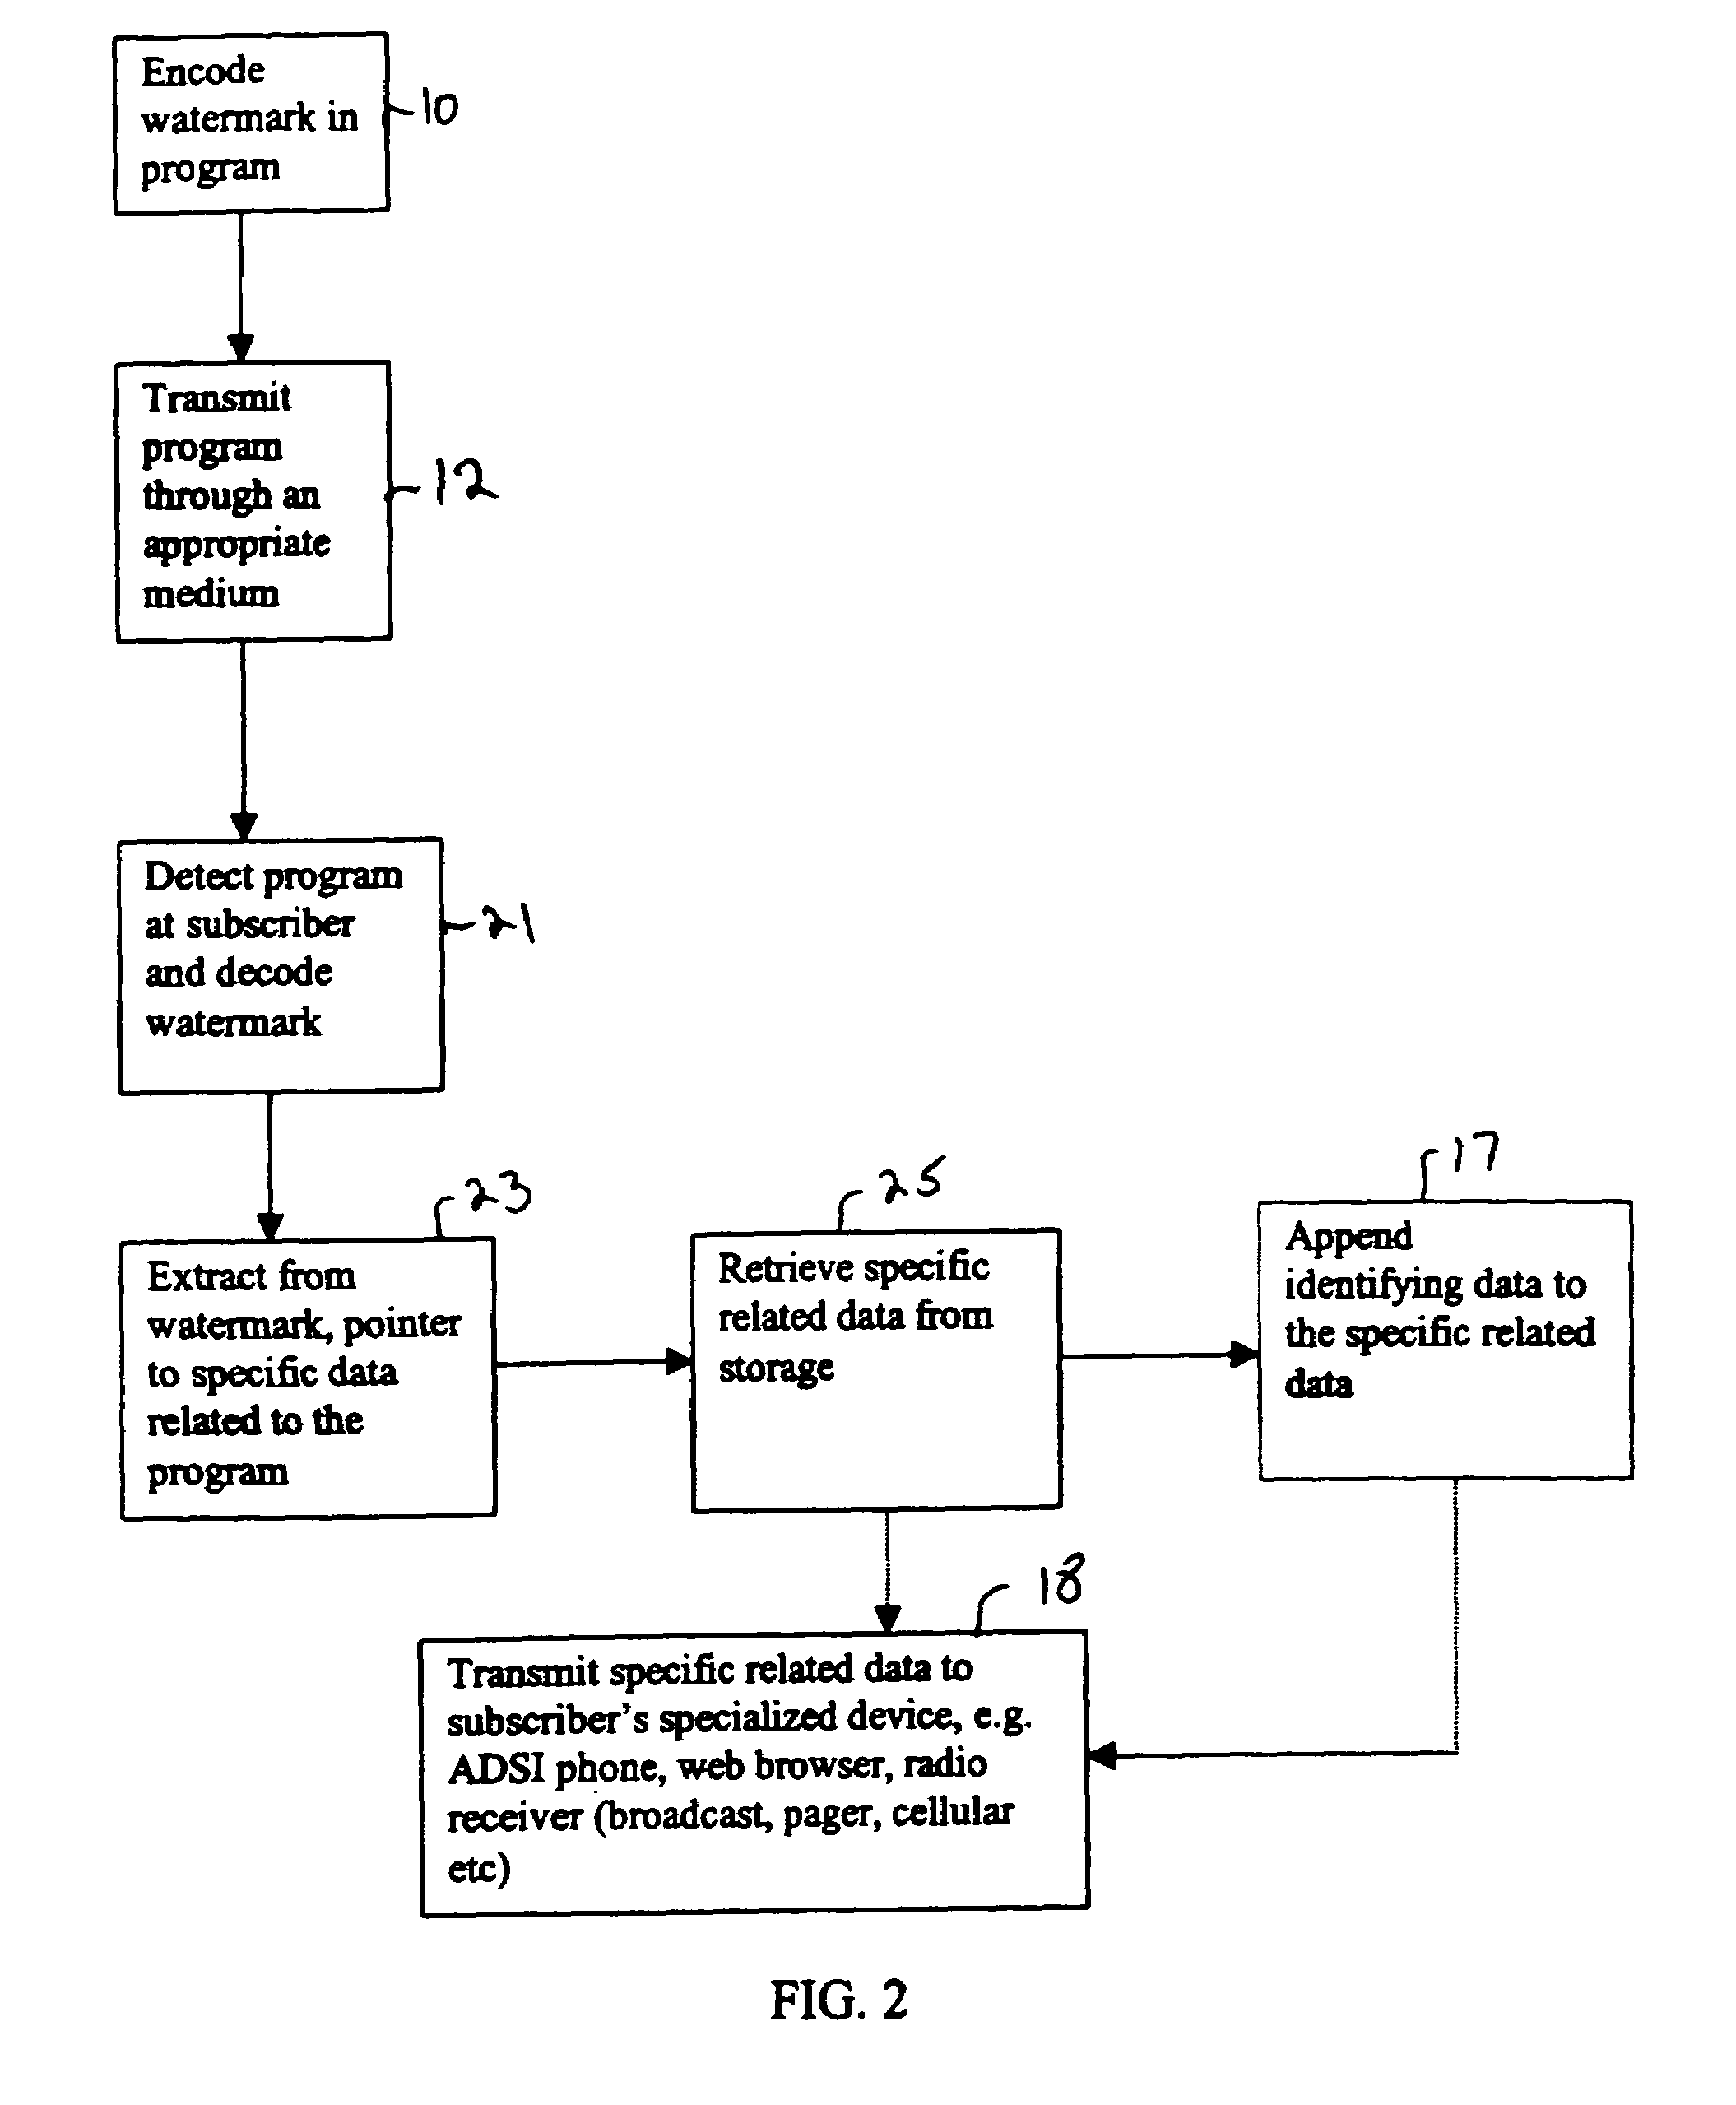 Method and system for capture of location specific media related information and delivery through communications network